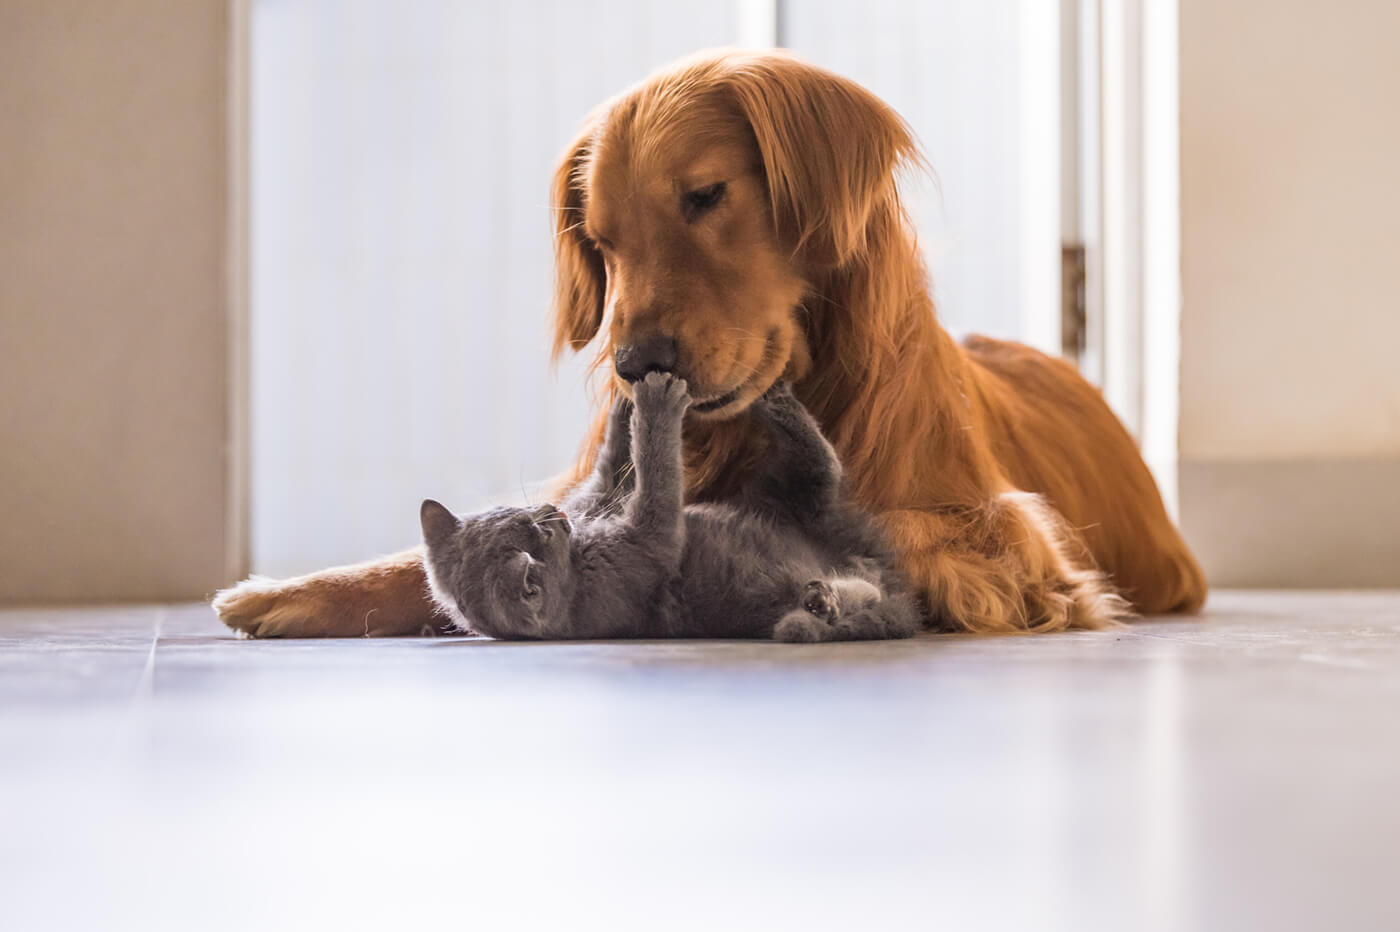 photos of pets  a cat and dog playing on floor